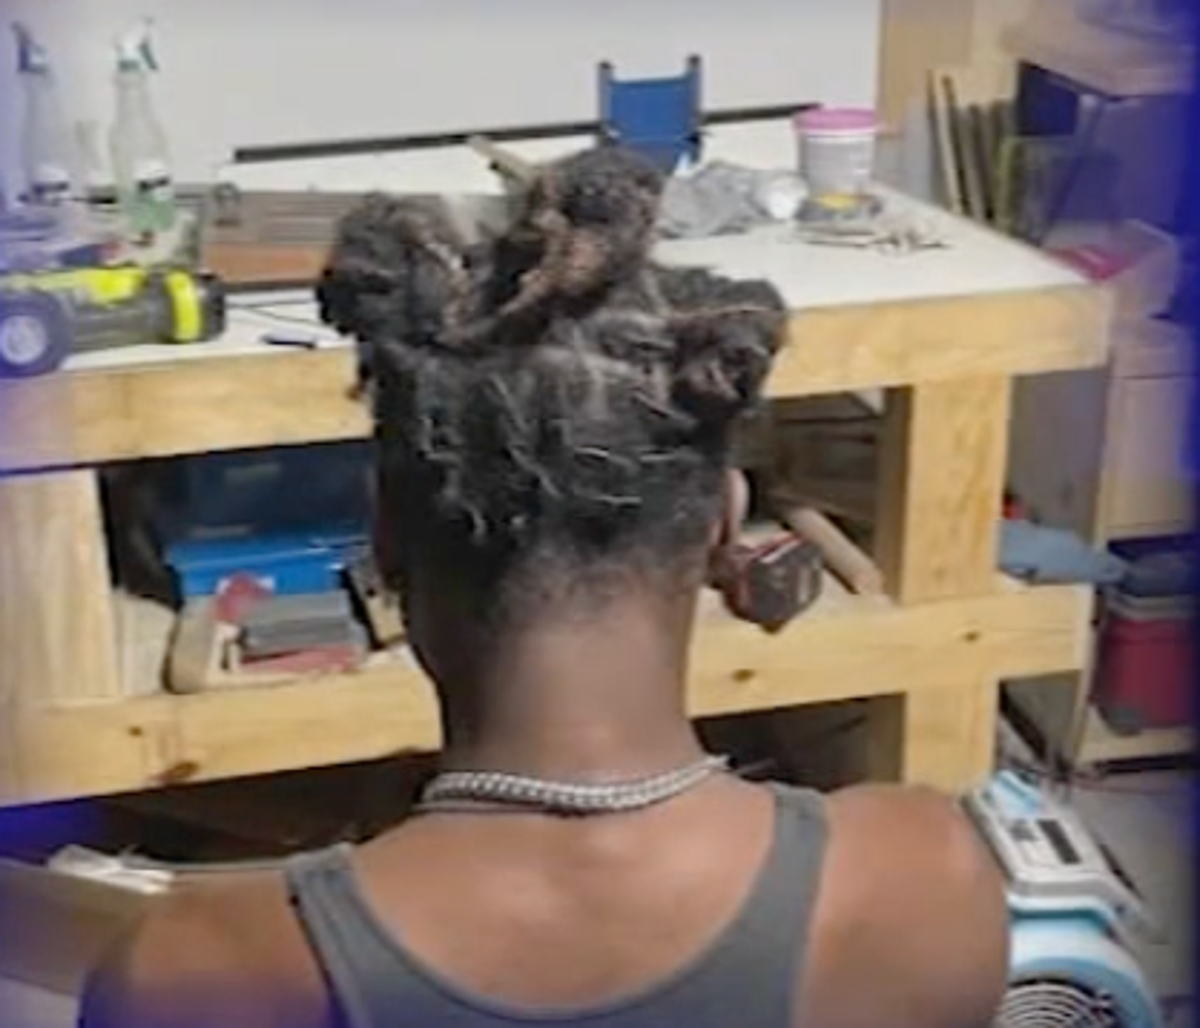 Black student suspended over hairstyle days after Texas ‘banned’ hair discrimination